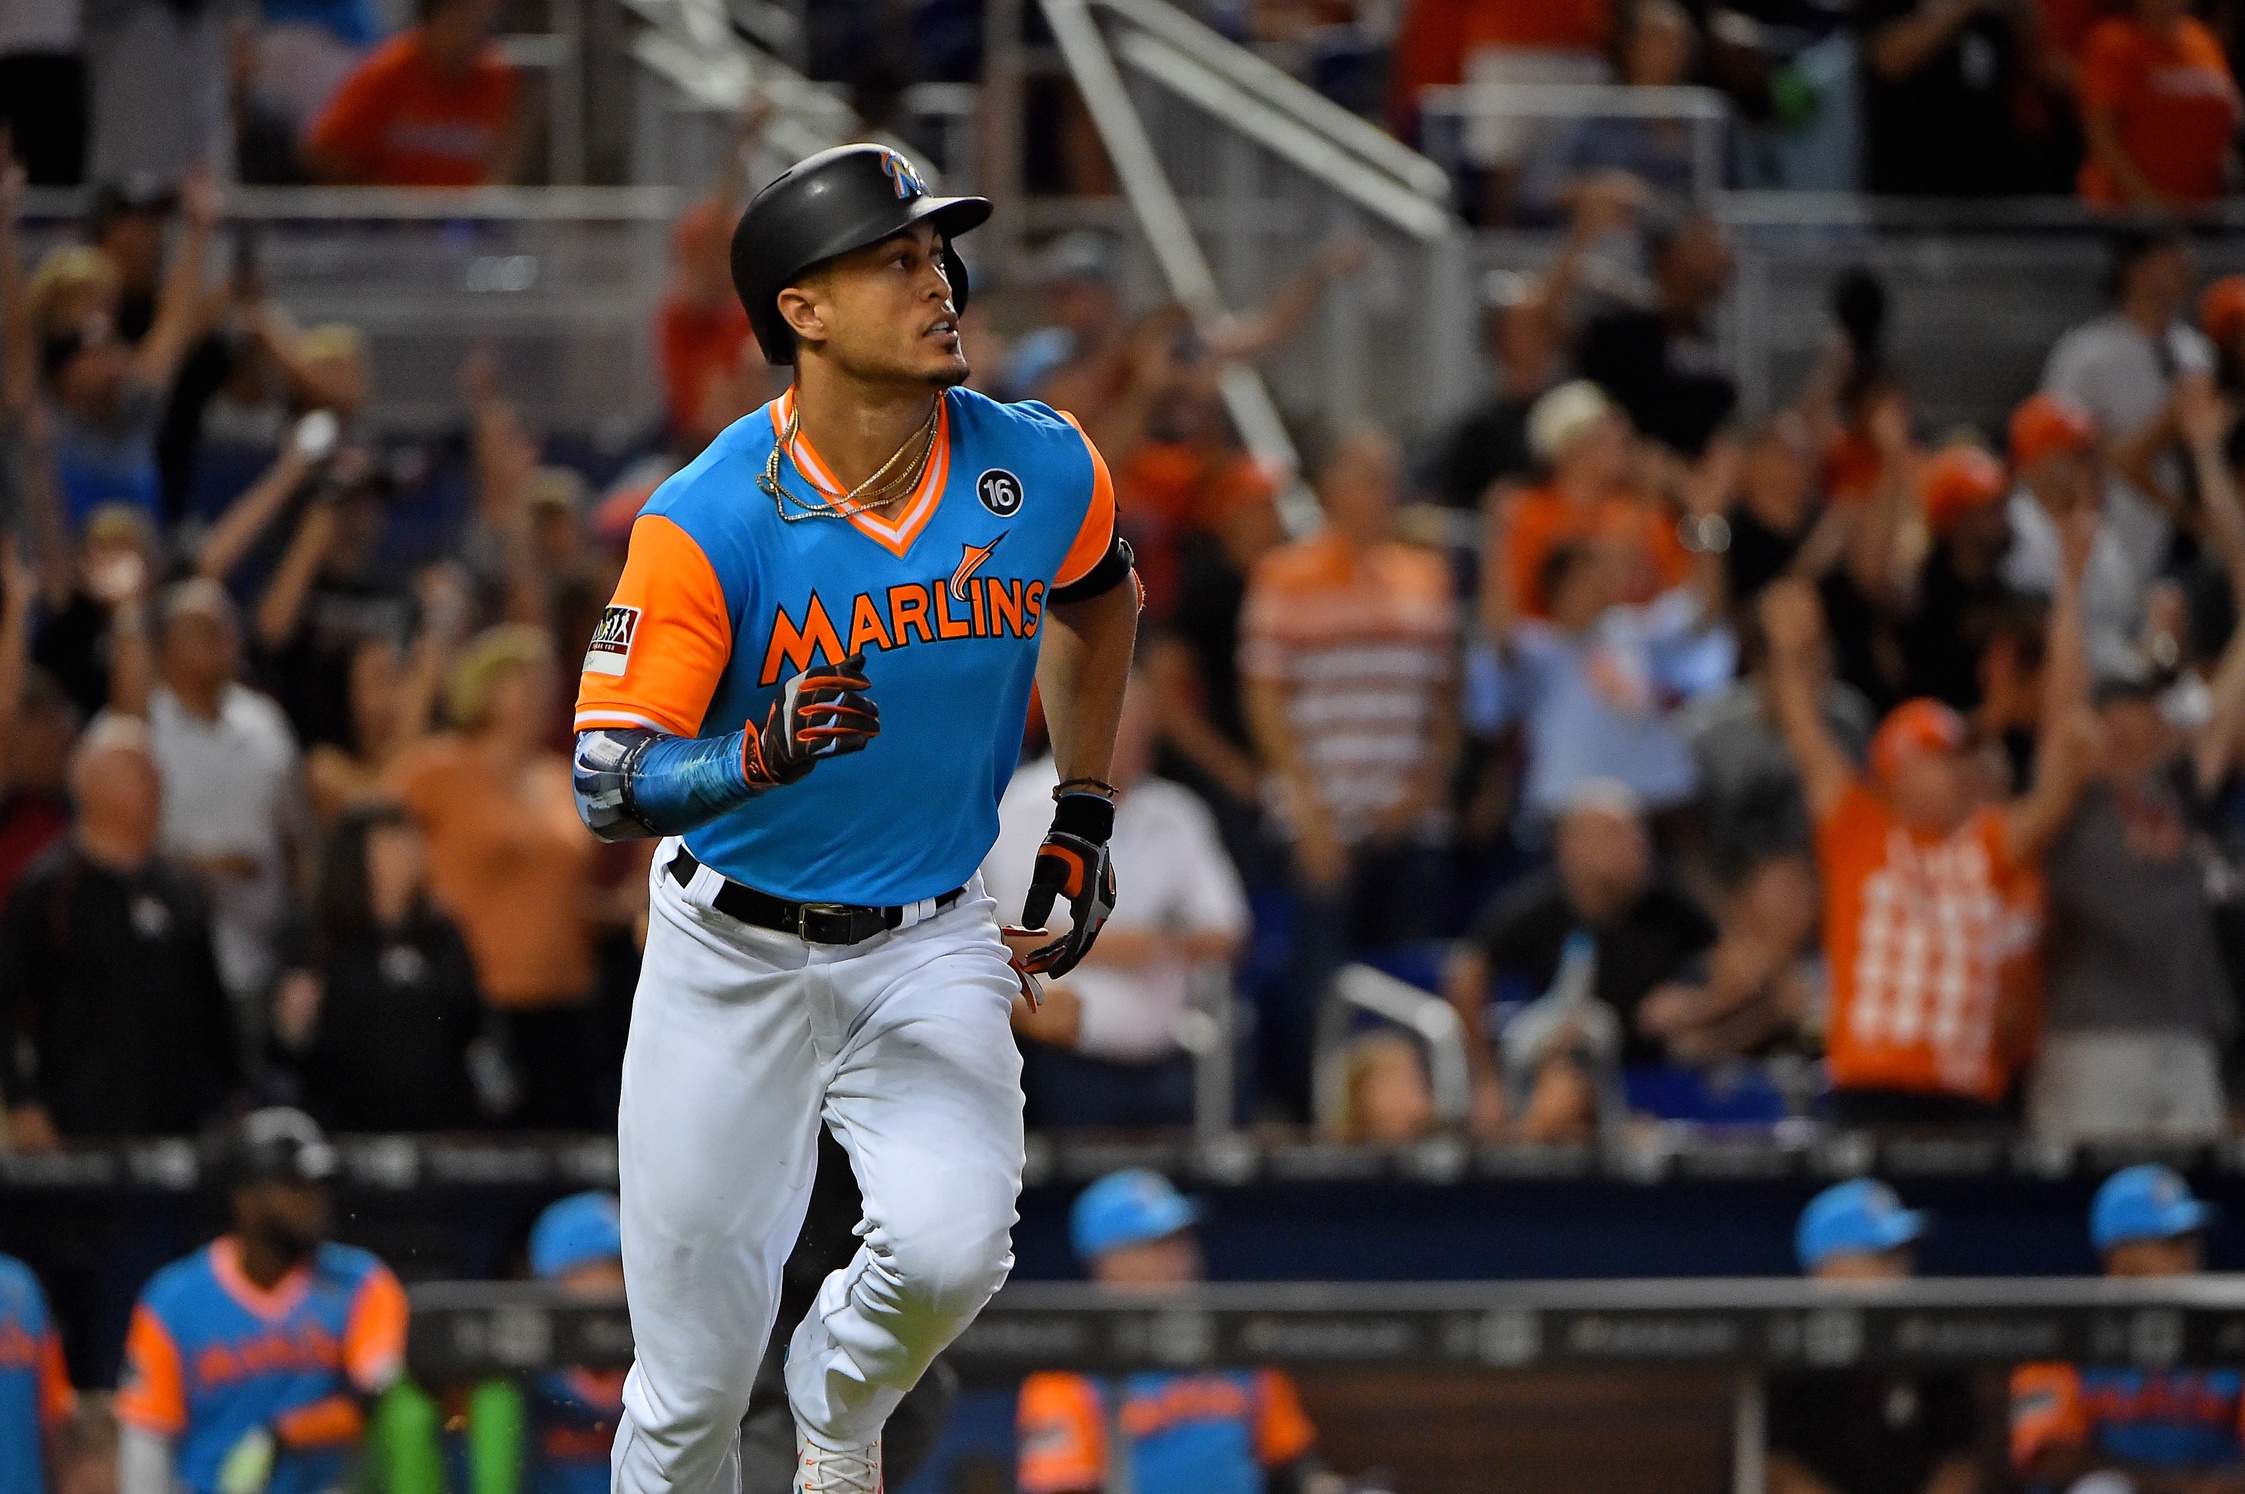 Giancarlo Stanton Hits 50th Home Run in Marlins' Victory - The New